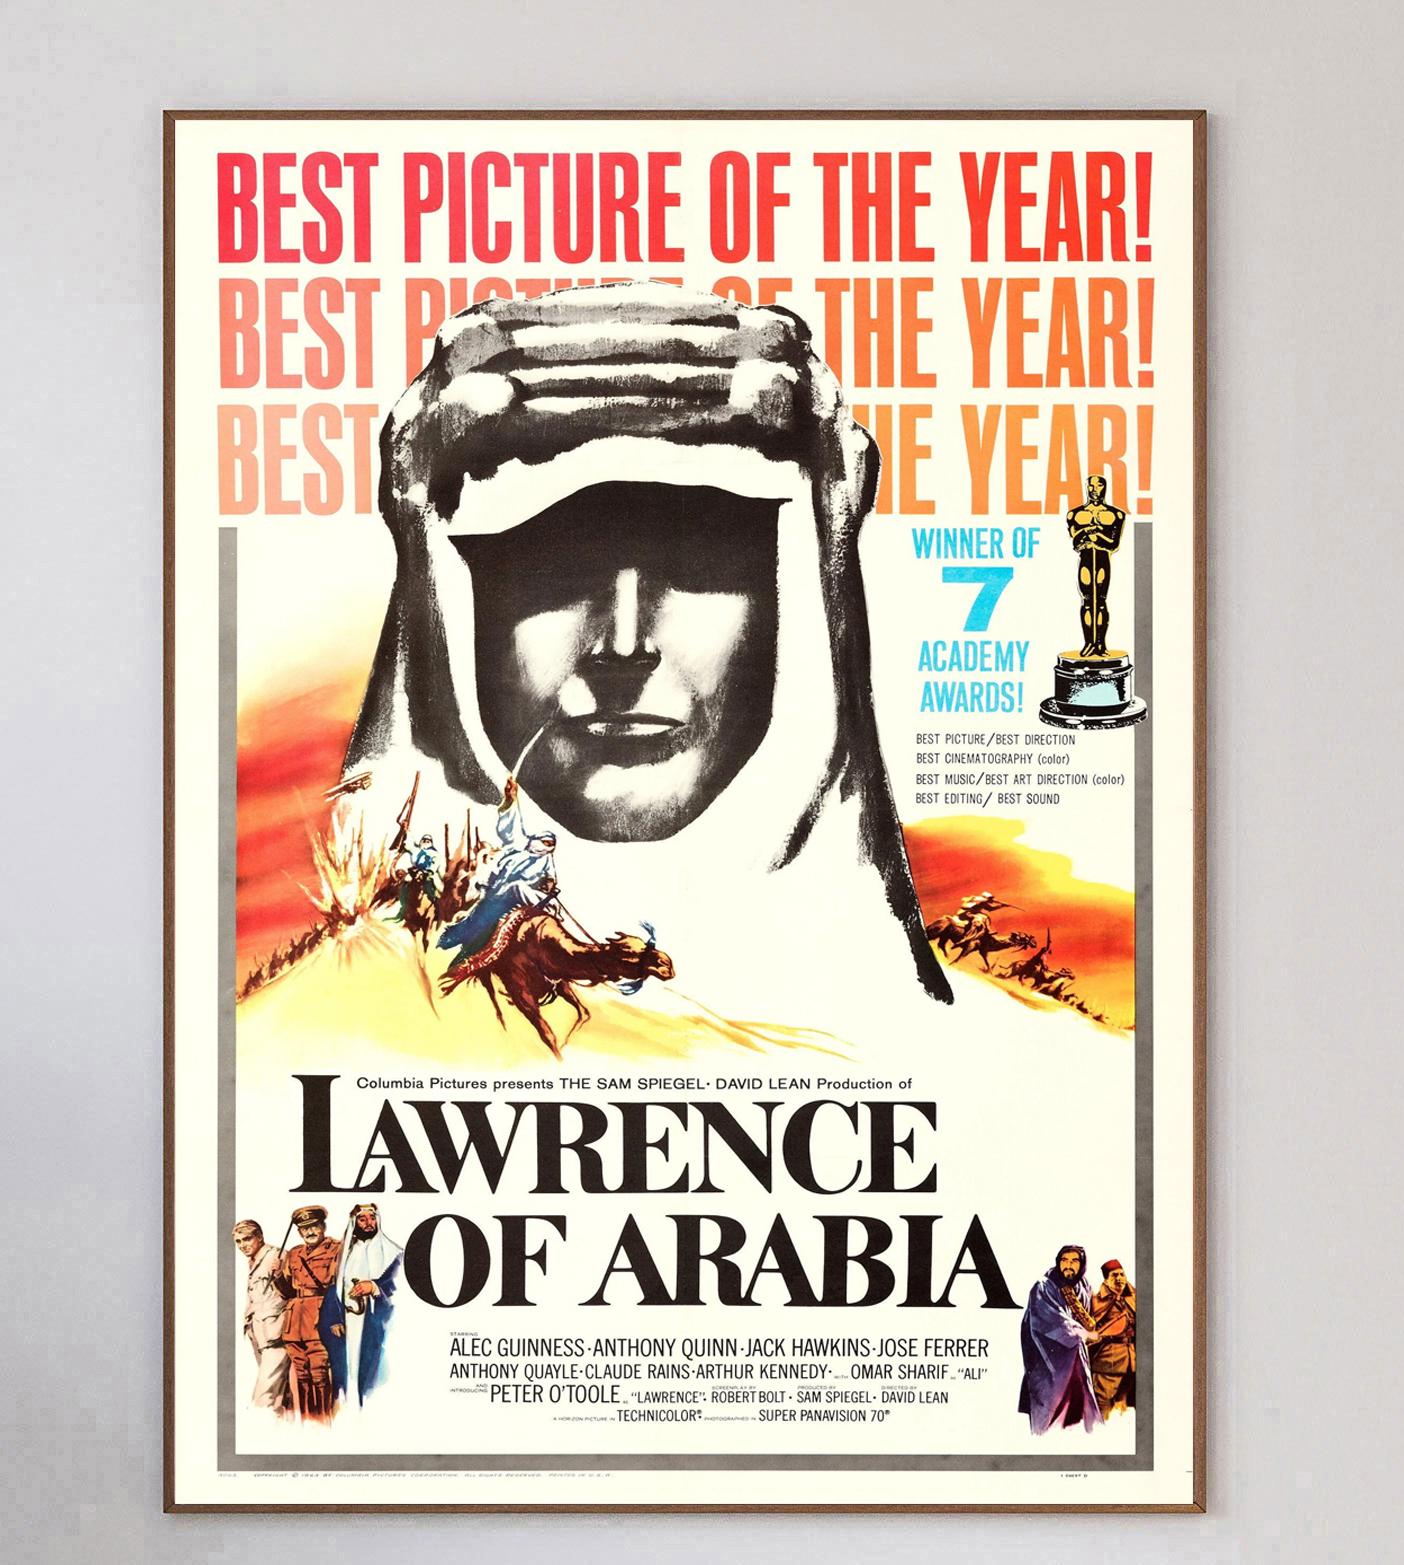 One of the greatest and most influential films of all time, Lawrence of Arabia was originally released in 1962. Based on the life of T.E. Lawrence, the film was directed by David Lean and starred Peter O'Toole and Alec Guinness, and went on to win 7